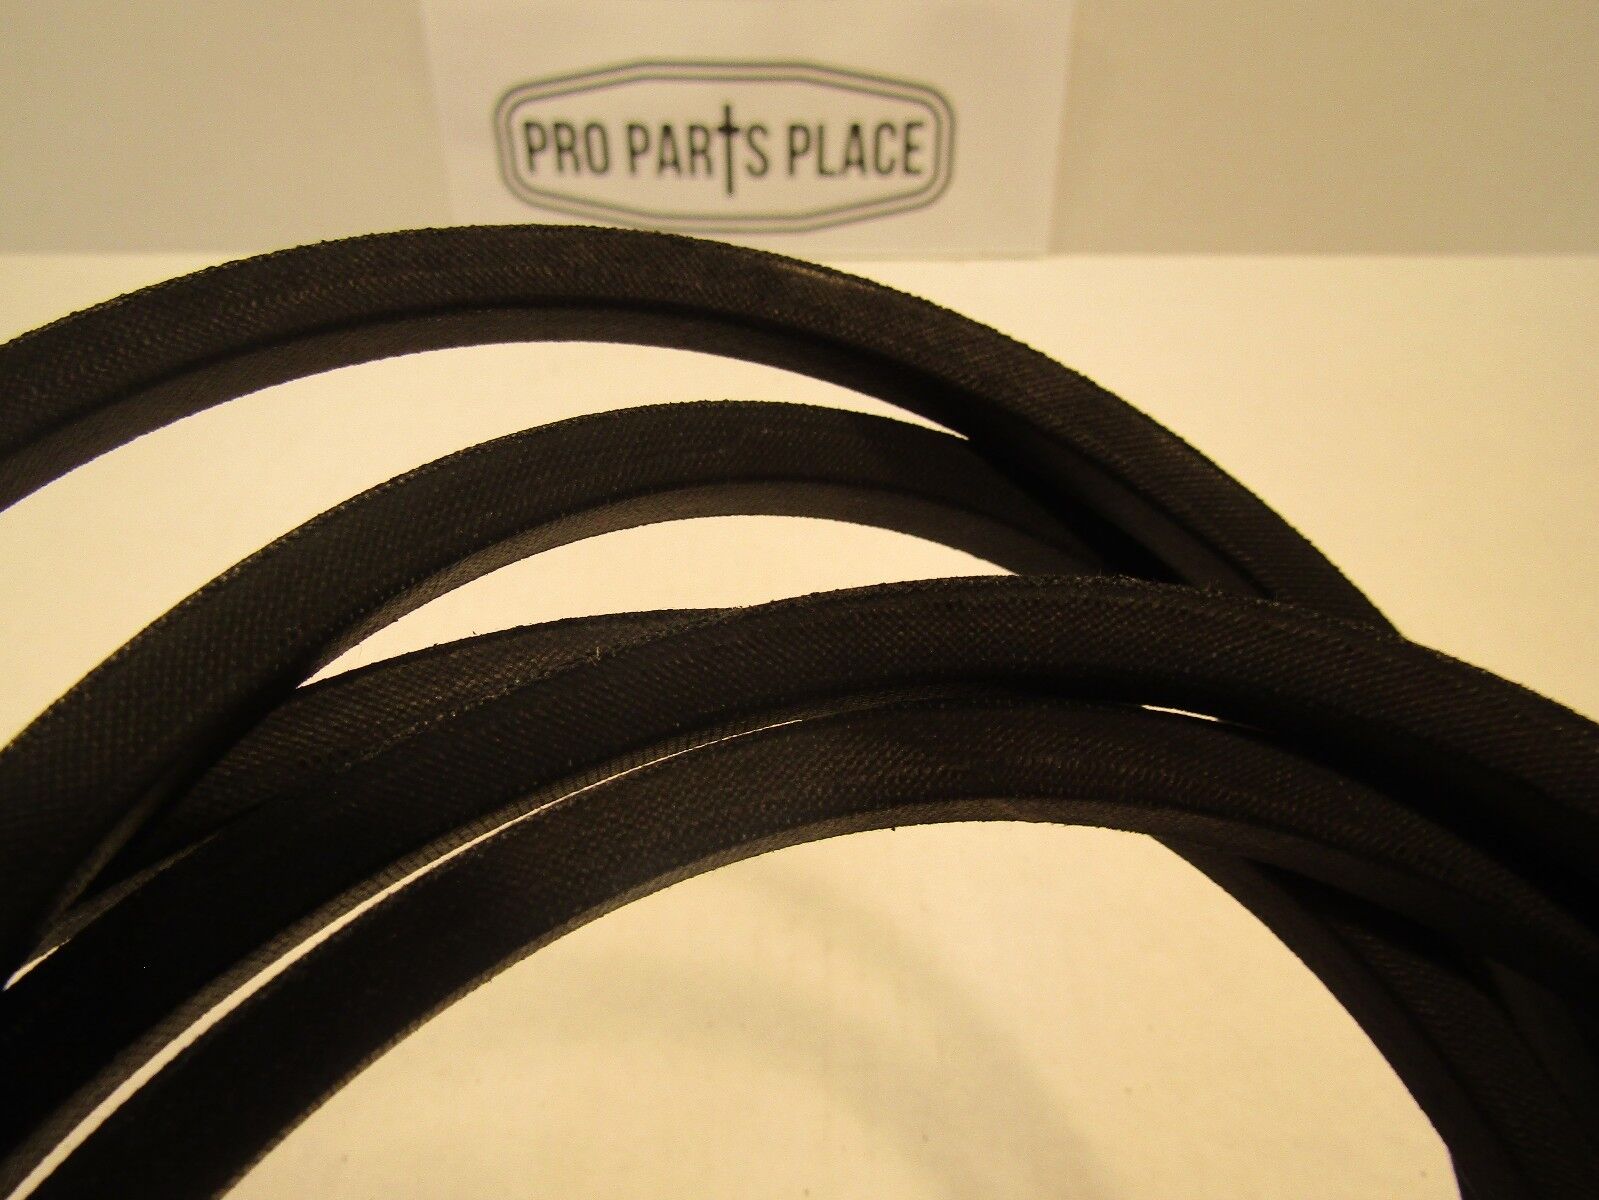 1/2" x 61" PUMP DRIVE REPLACEMENT BELT FOR SCAG 481461 48760 TURF TIGER 52" 61" - 0